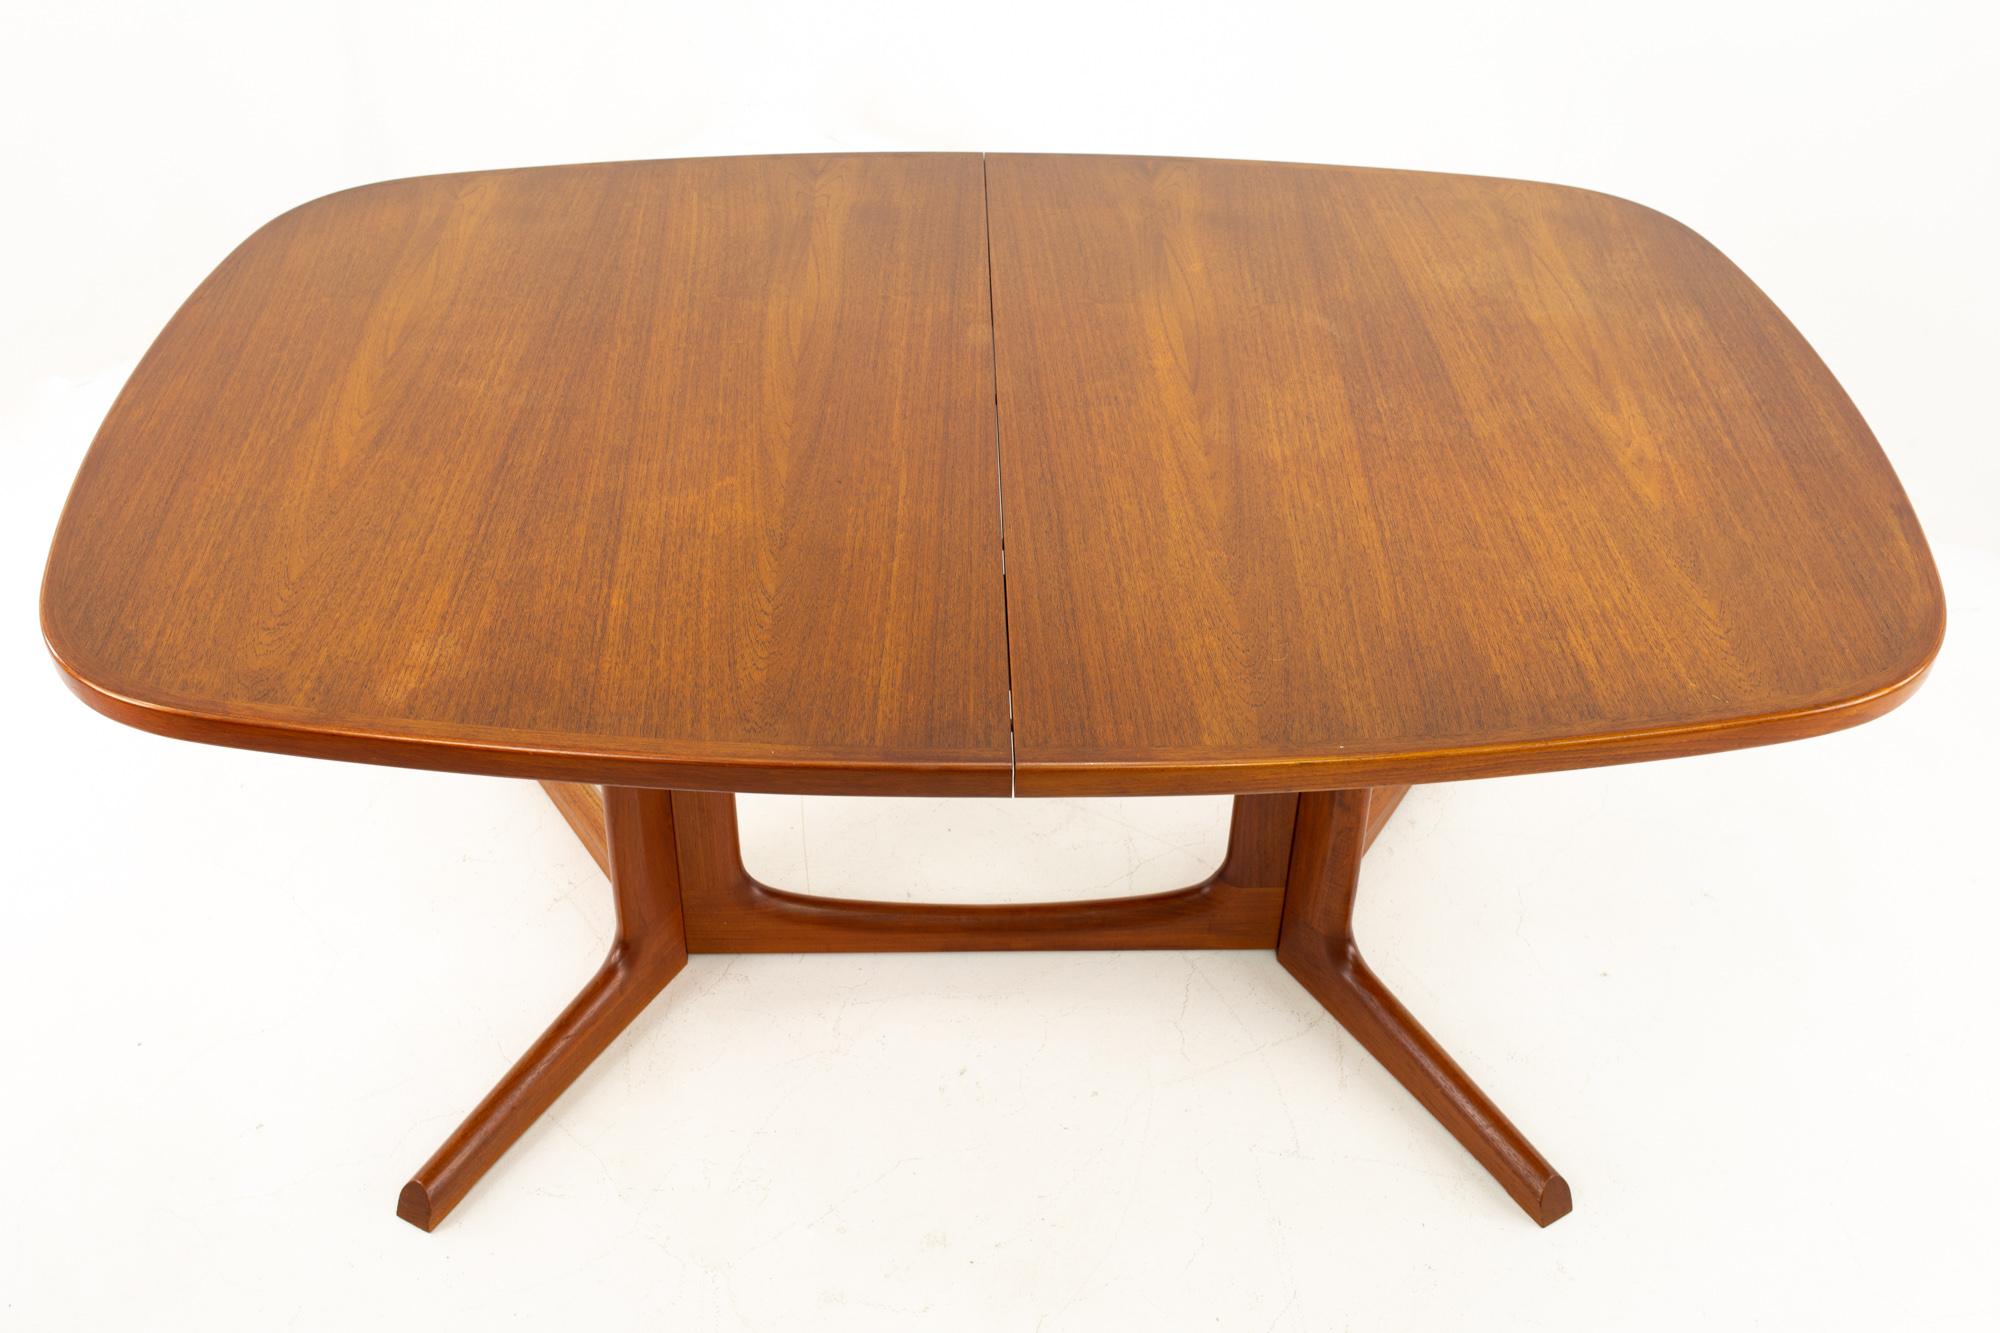 Gudme Mobelfabrik midcentury dining table with 2 leaves

Table without leaves measures: 63 wide x 41.5 deep x 29 high with a chair clearance of 27 inches; width with leaves is 102 inches

This price includes getting this piece in what we call